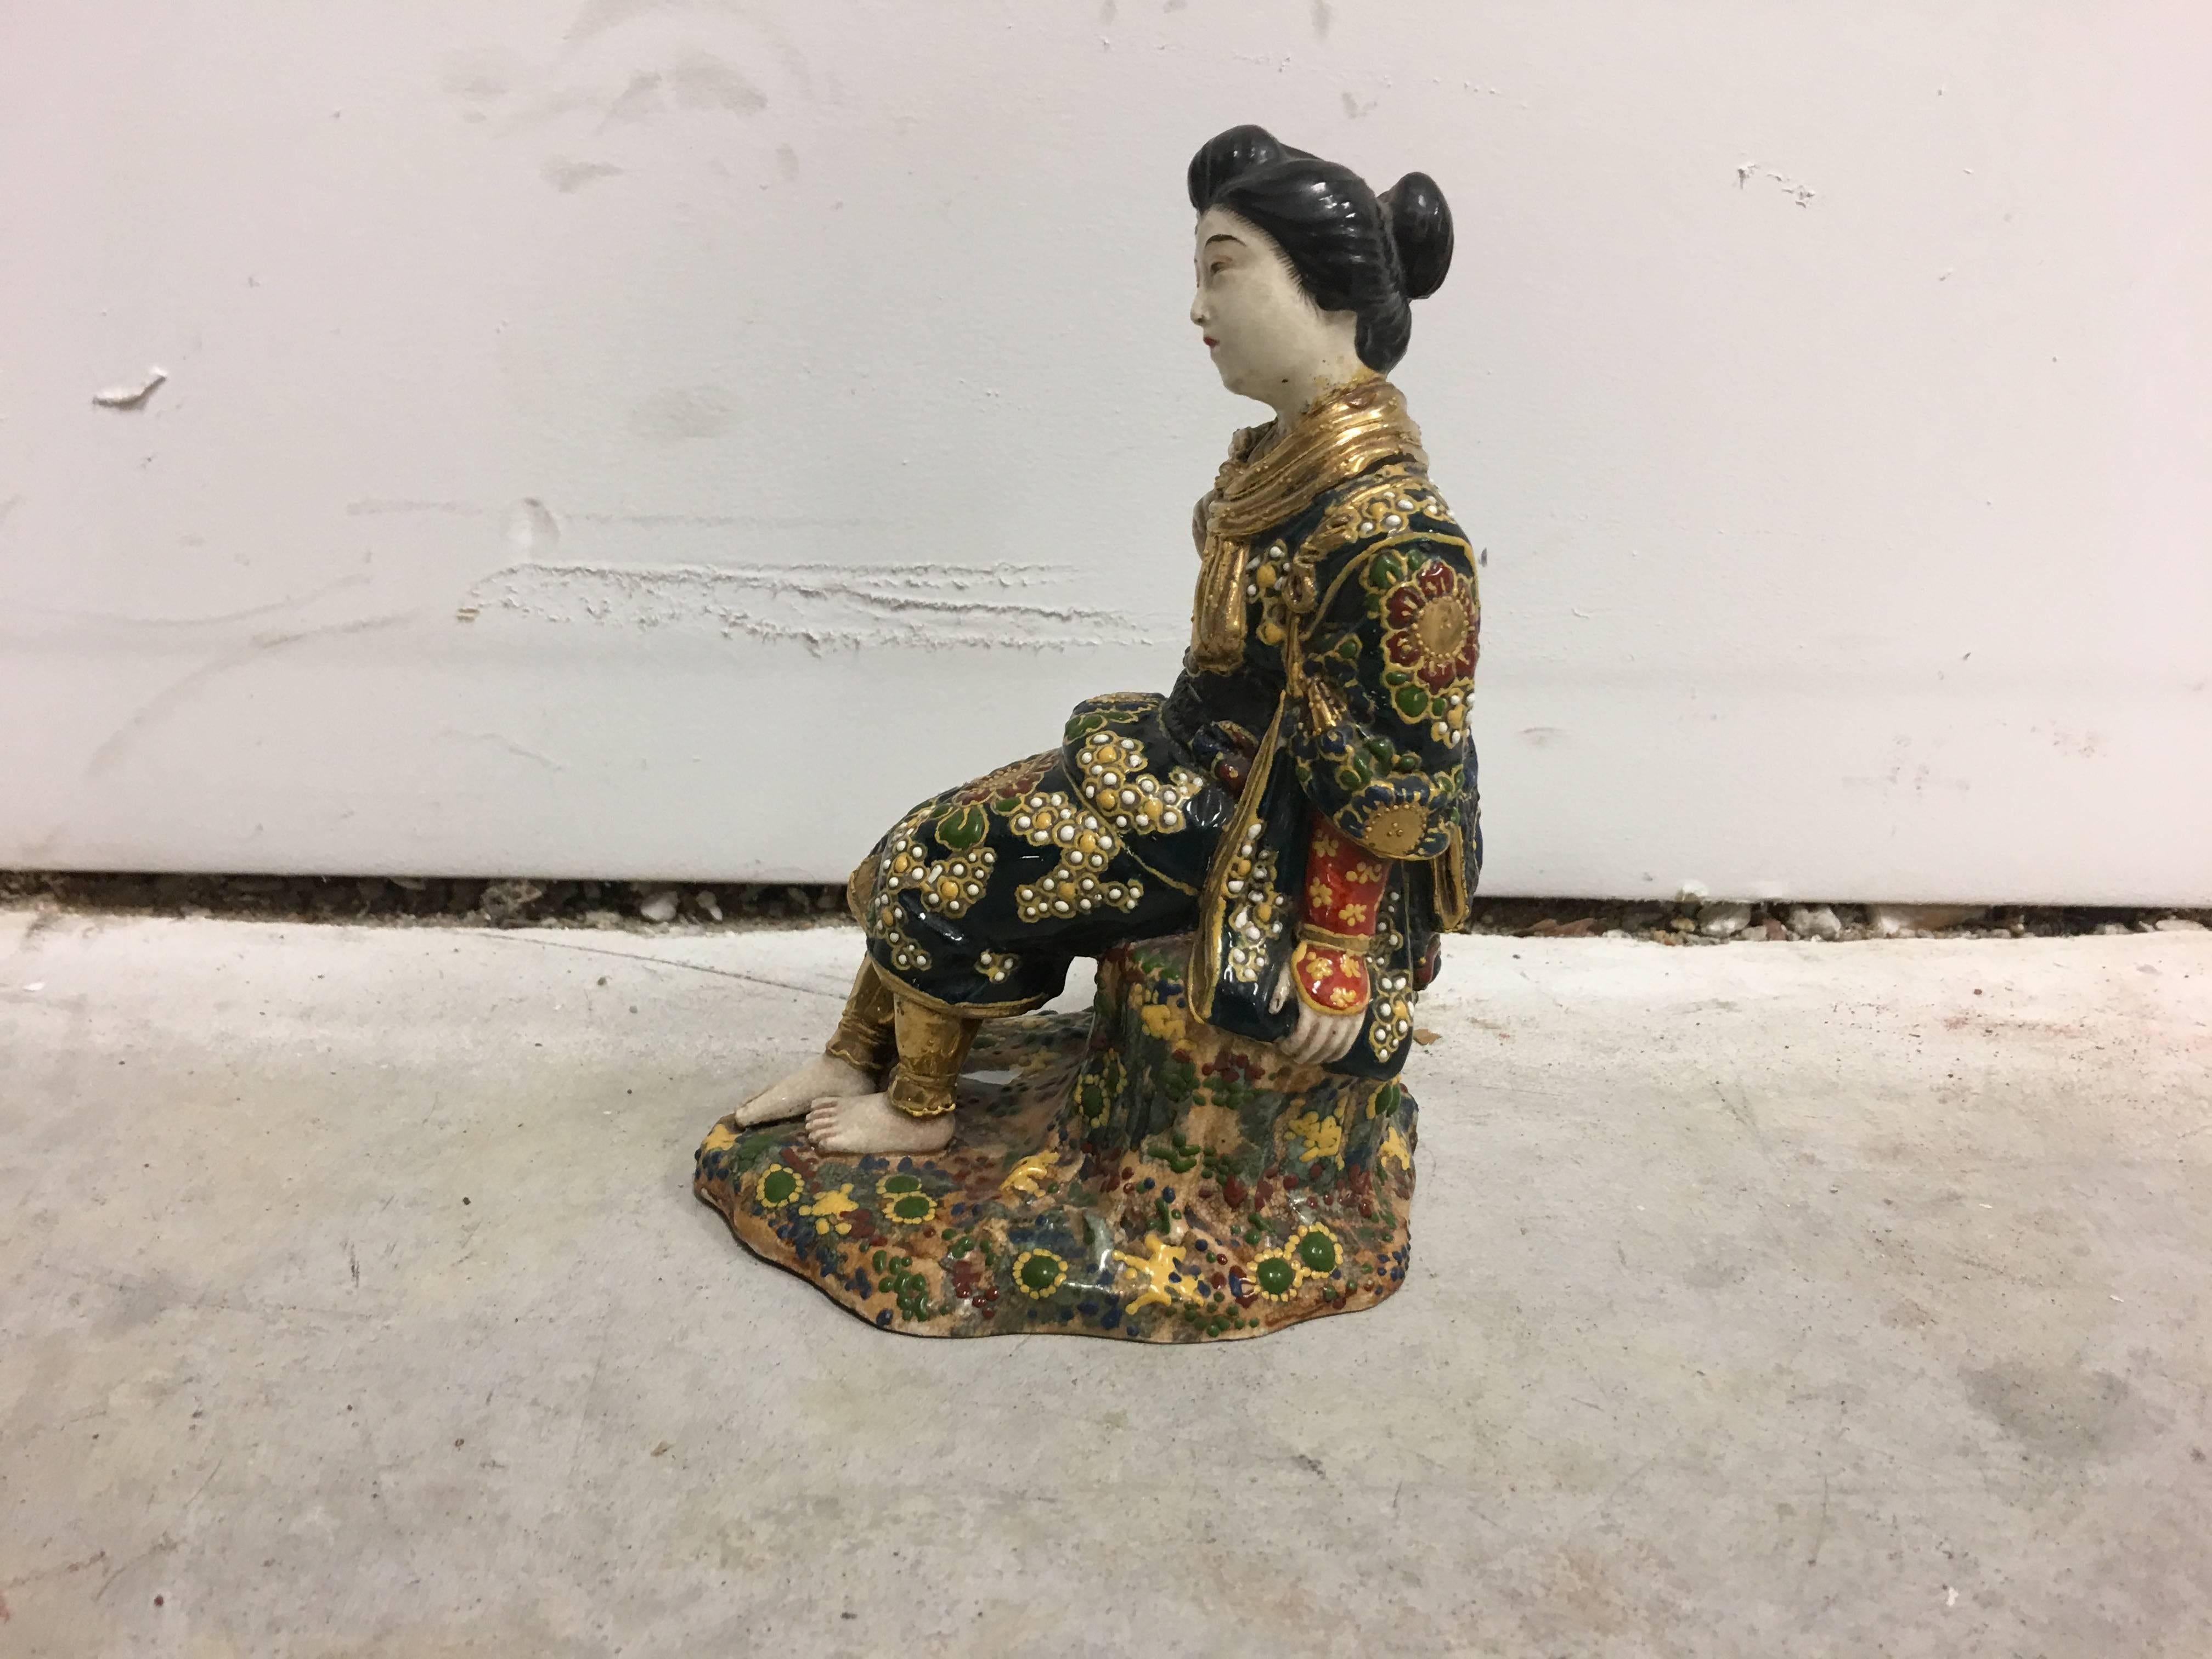 Offered is a stunning, 1960s Asian geisha polychrome ceramic statue with gold accents.